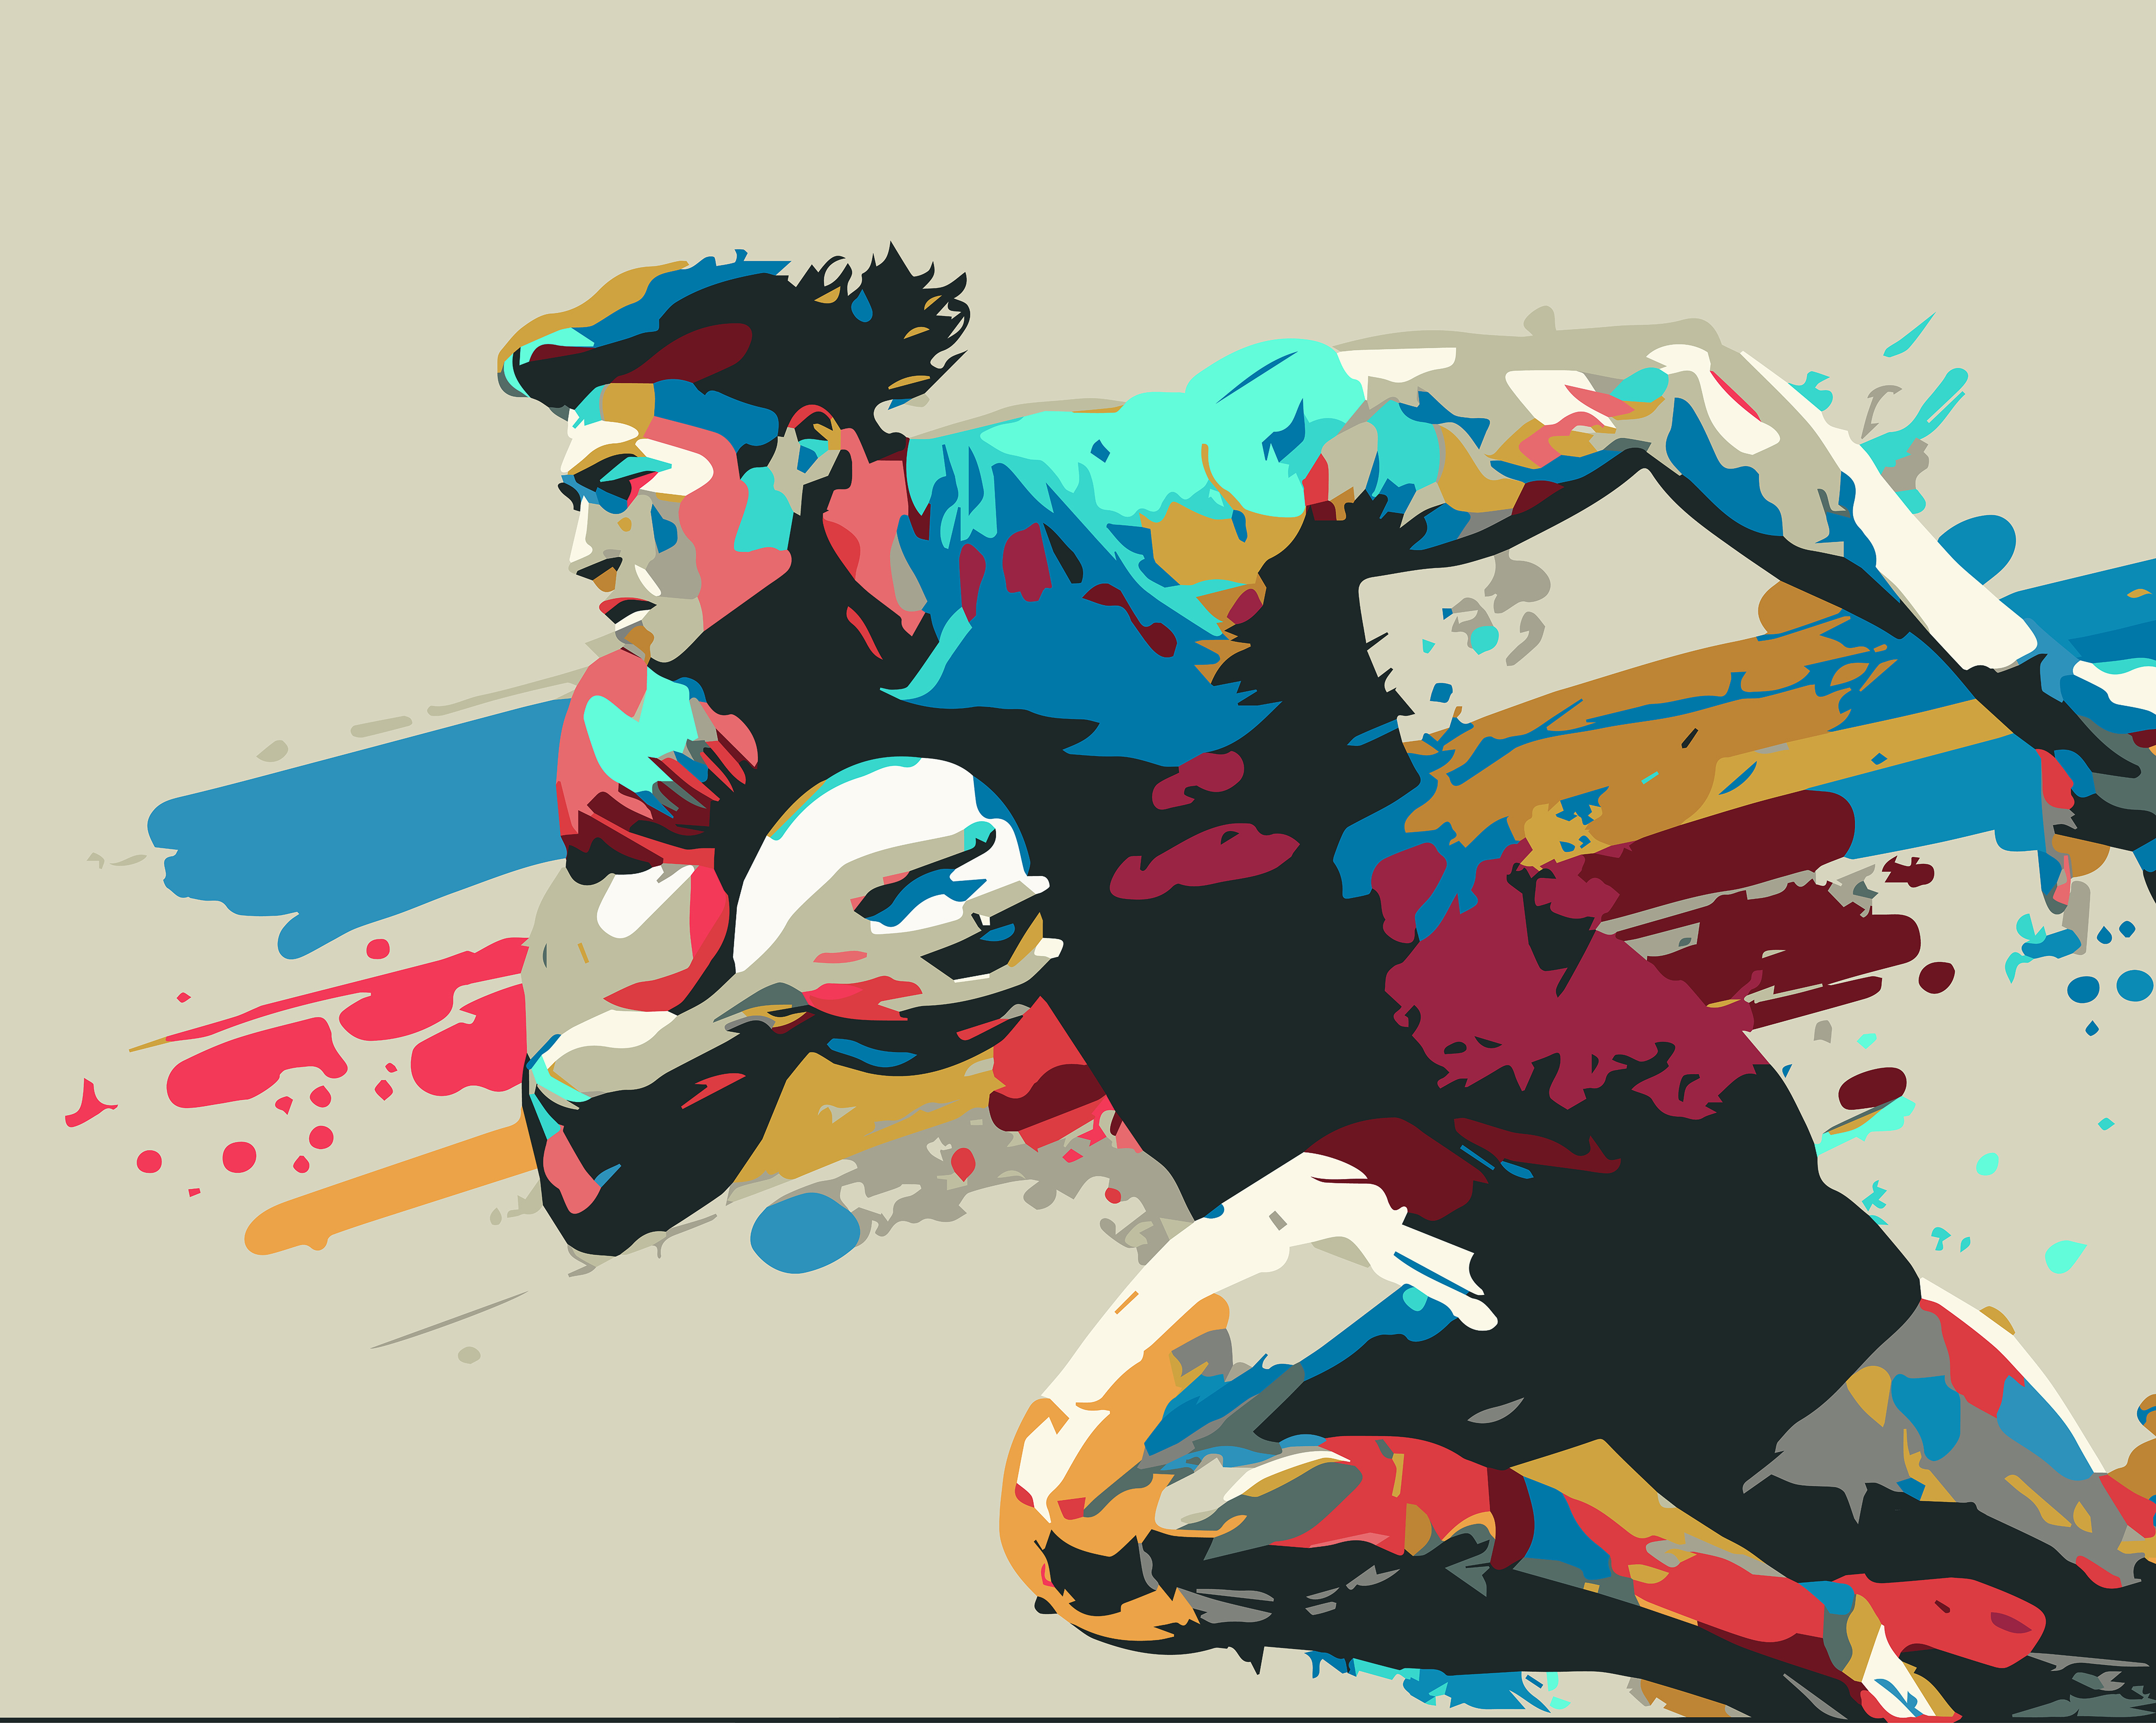 Origin Murals Rugby Player in Graphic Style Natural Wall Mural - 3.5 x 2.8m